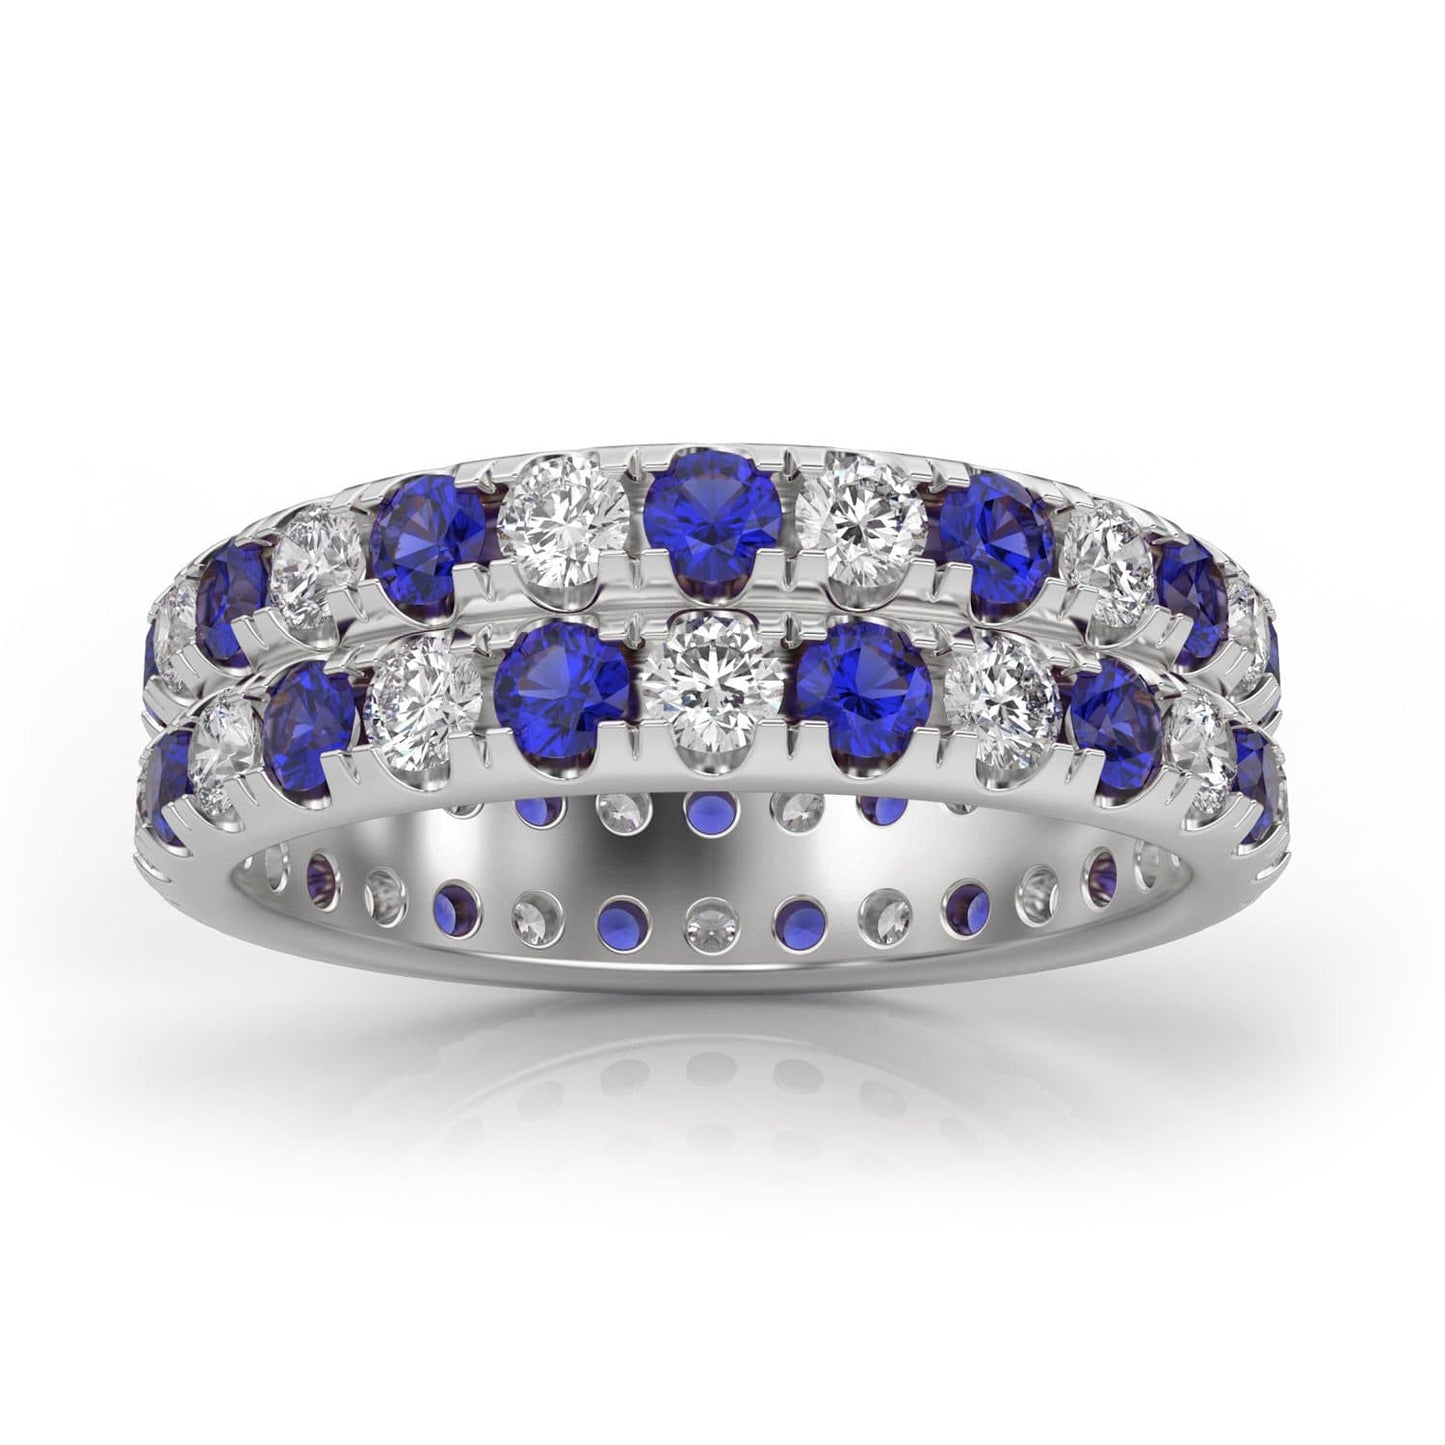 2ct Two-Row Diamond & Sapphire Eternity Ring in 14k Gold